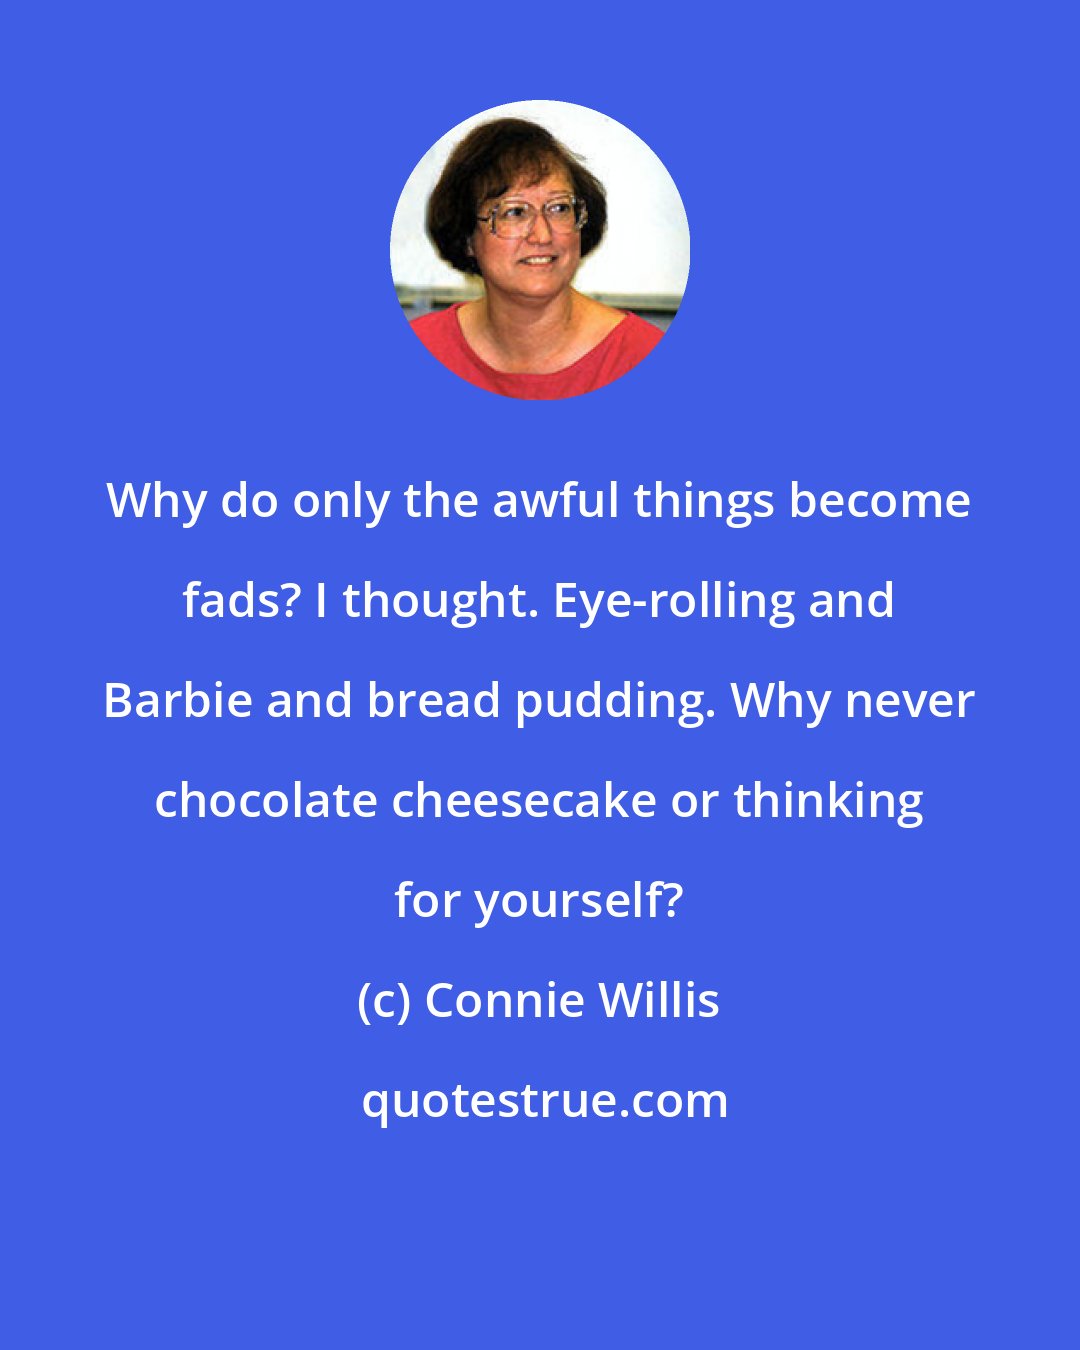 Connie Willis: Why do only the awful things become fads? I thought. Eye-rolling and Barbie and bread pudding. Why never chocolate cheesecake or thinking for yourself?